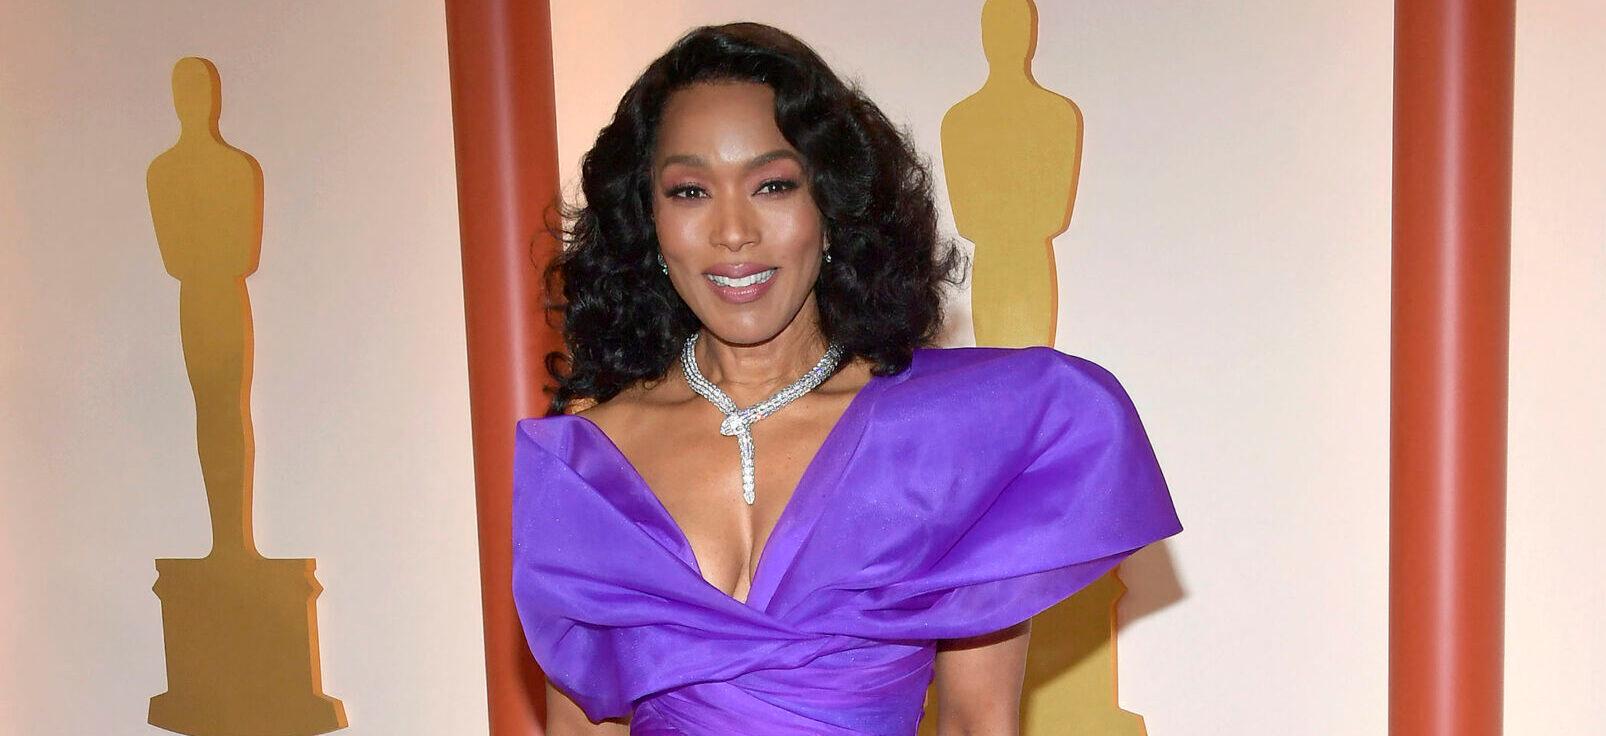 Angela Bassett Revealed As A Recipient Of An Honorary Oscar Award After Two Previous Nominations